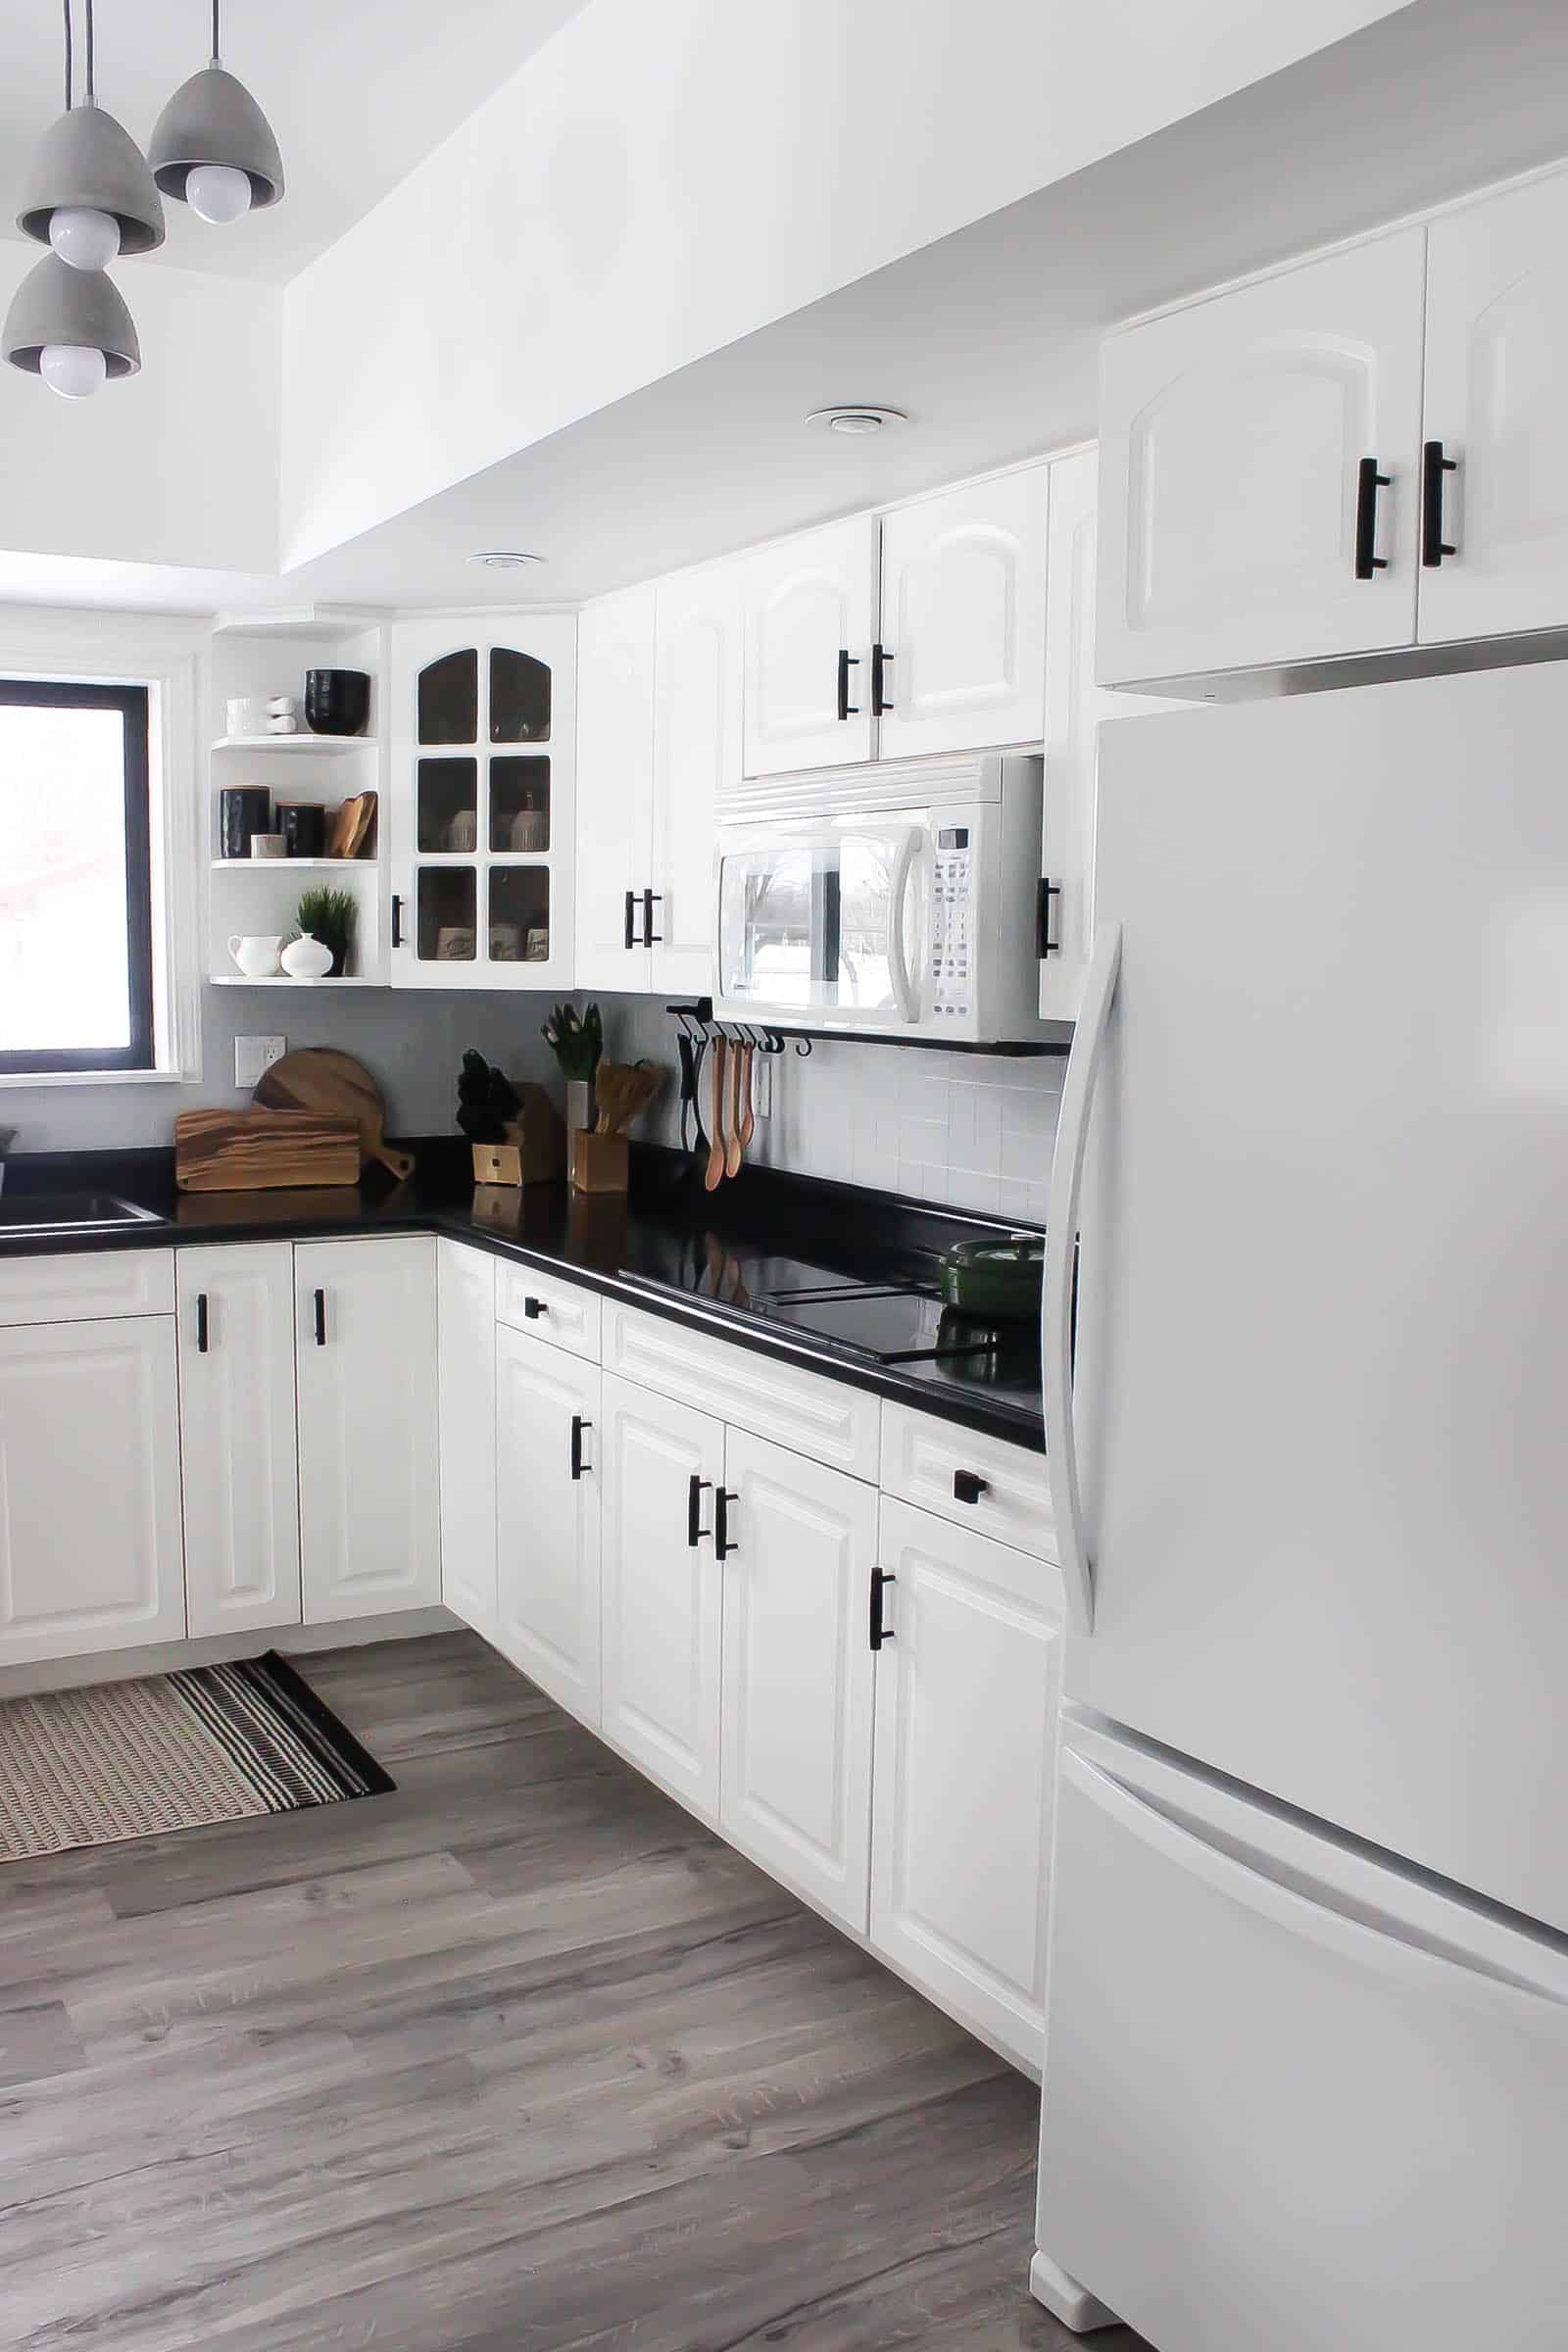 Modern white and black kitchen with glass tile